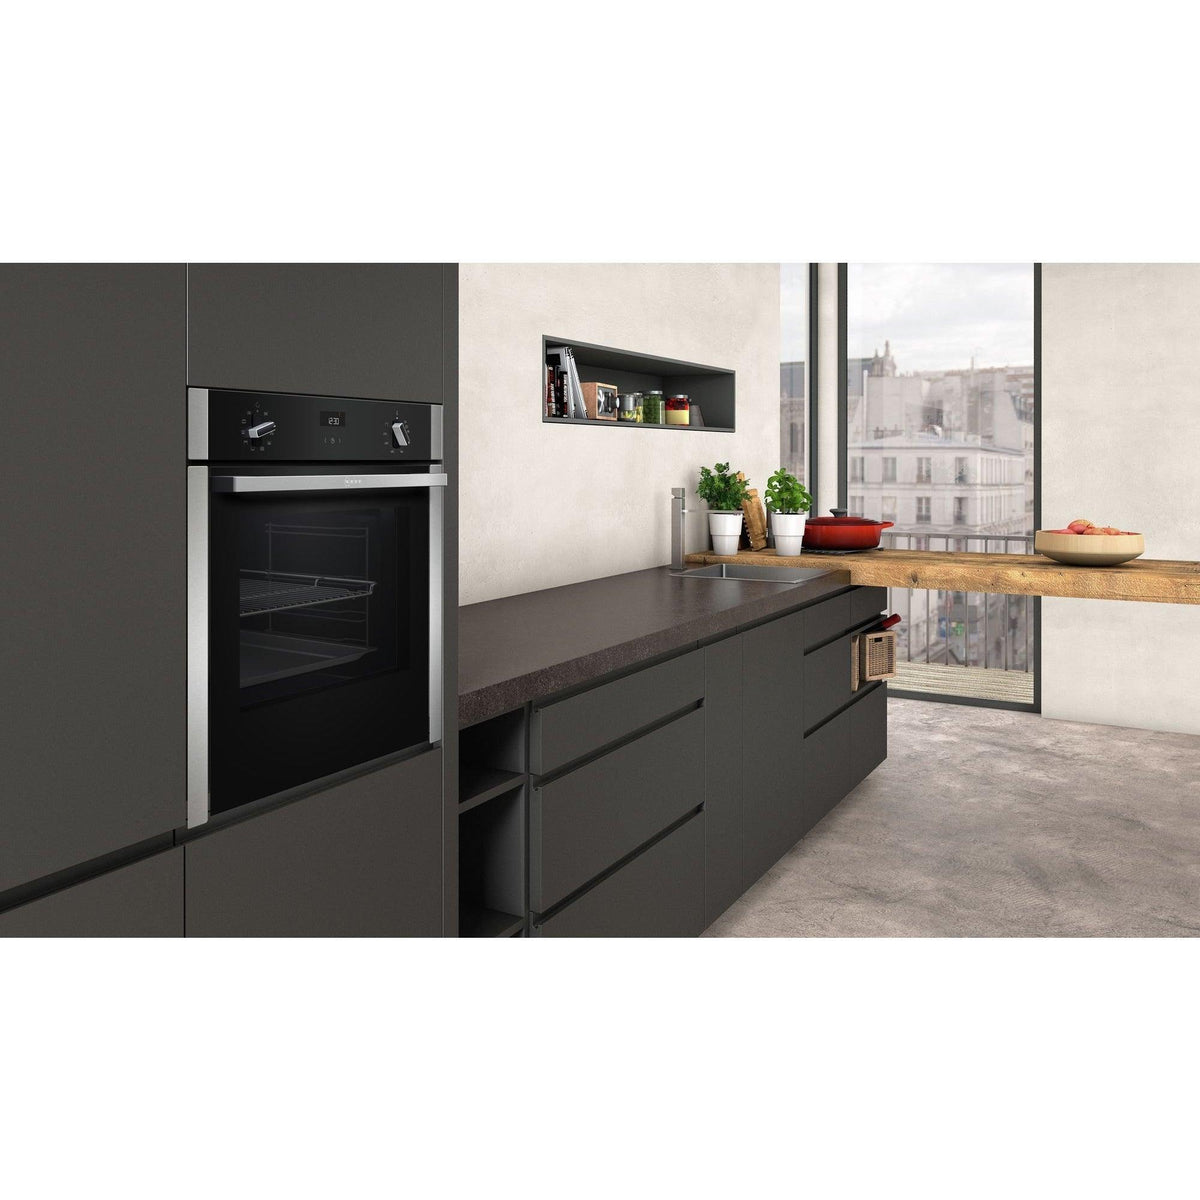 Neff N50 Built-In Electric Single Oven - Stainless Steel | B3ACE4HN0B from DID Electrical - guaranteed Irish, guaranteed quality service. (6890781638844)